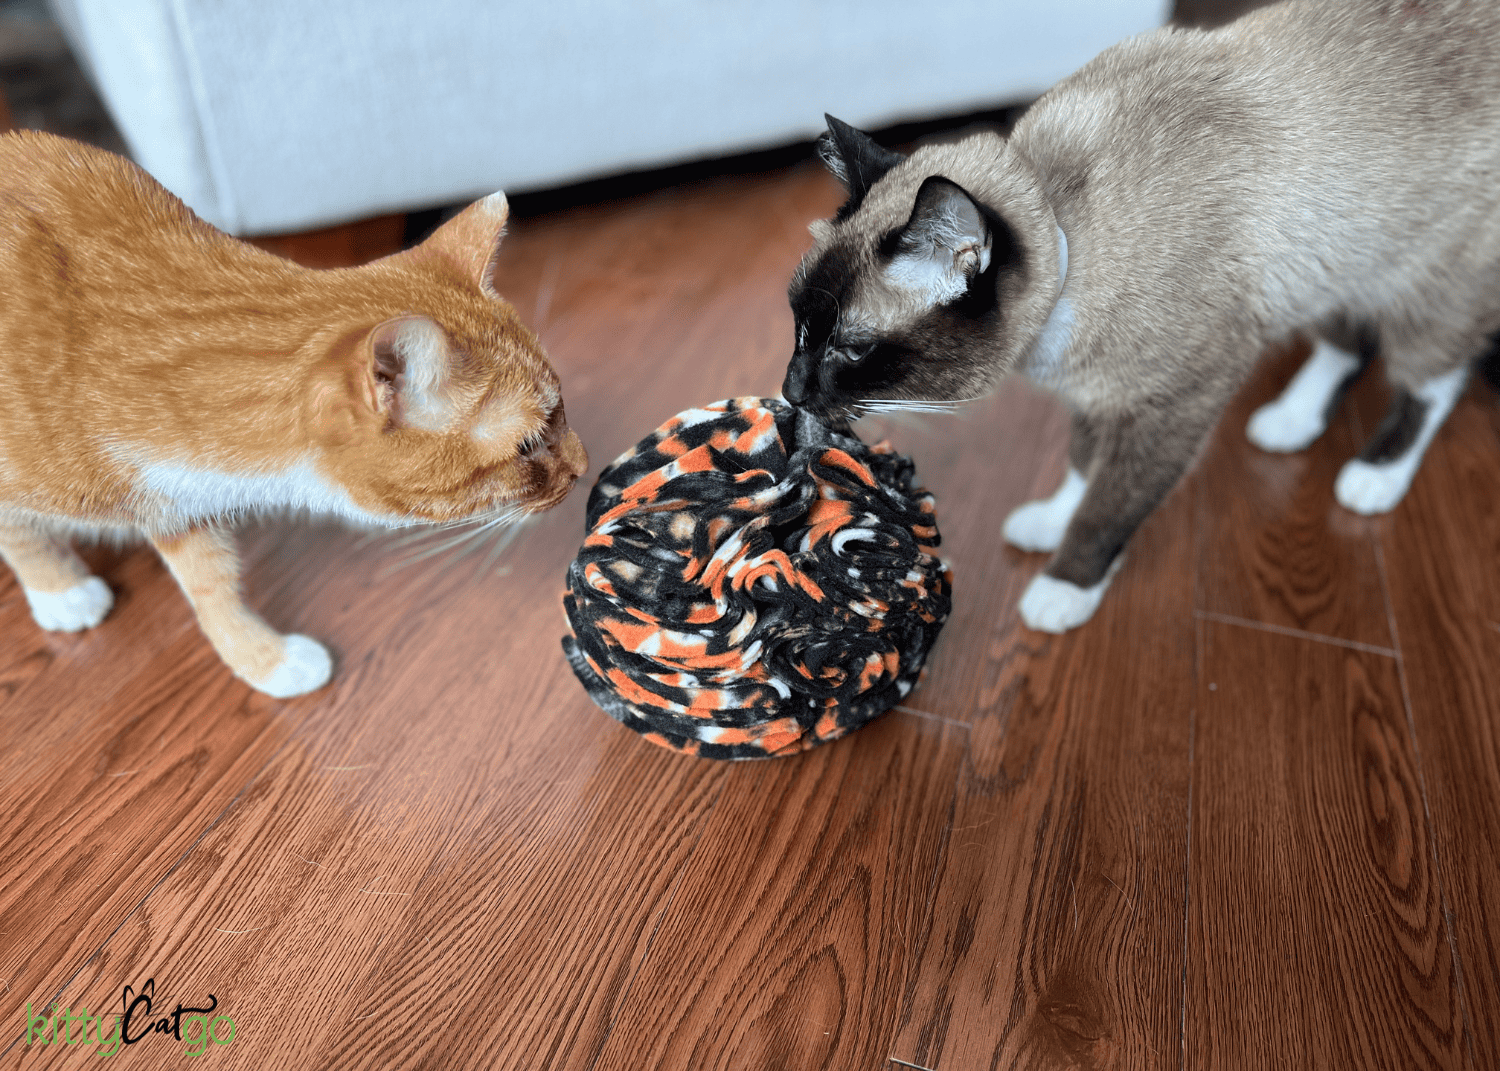 https://kittycatgo.com/wp-content/uploads/2021/08/two-cats-with-a-snuffle-ball.png